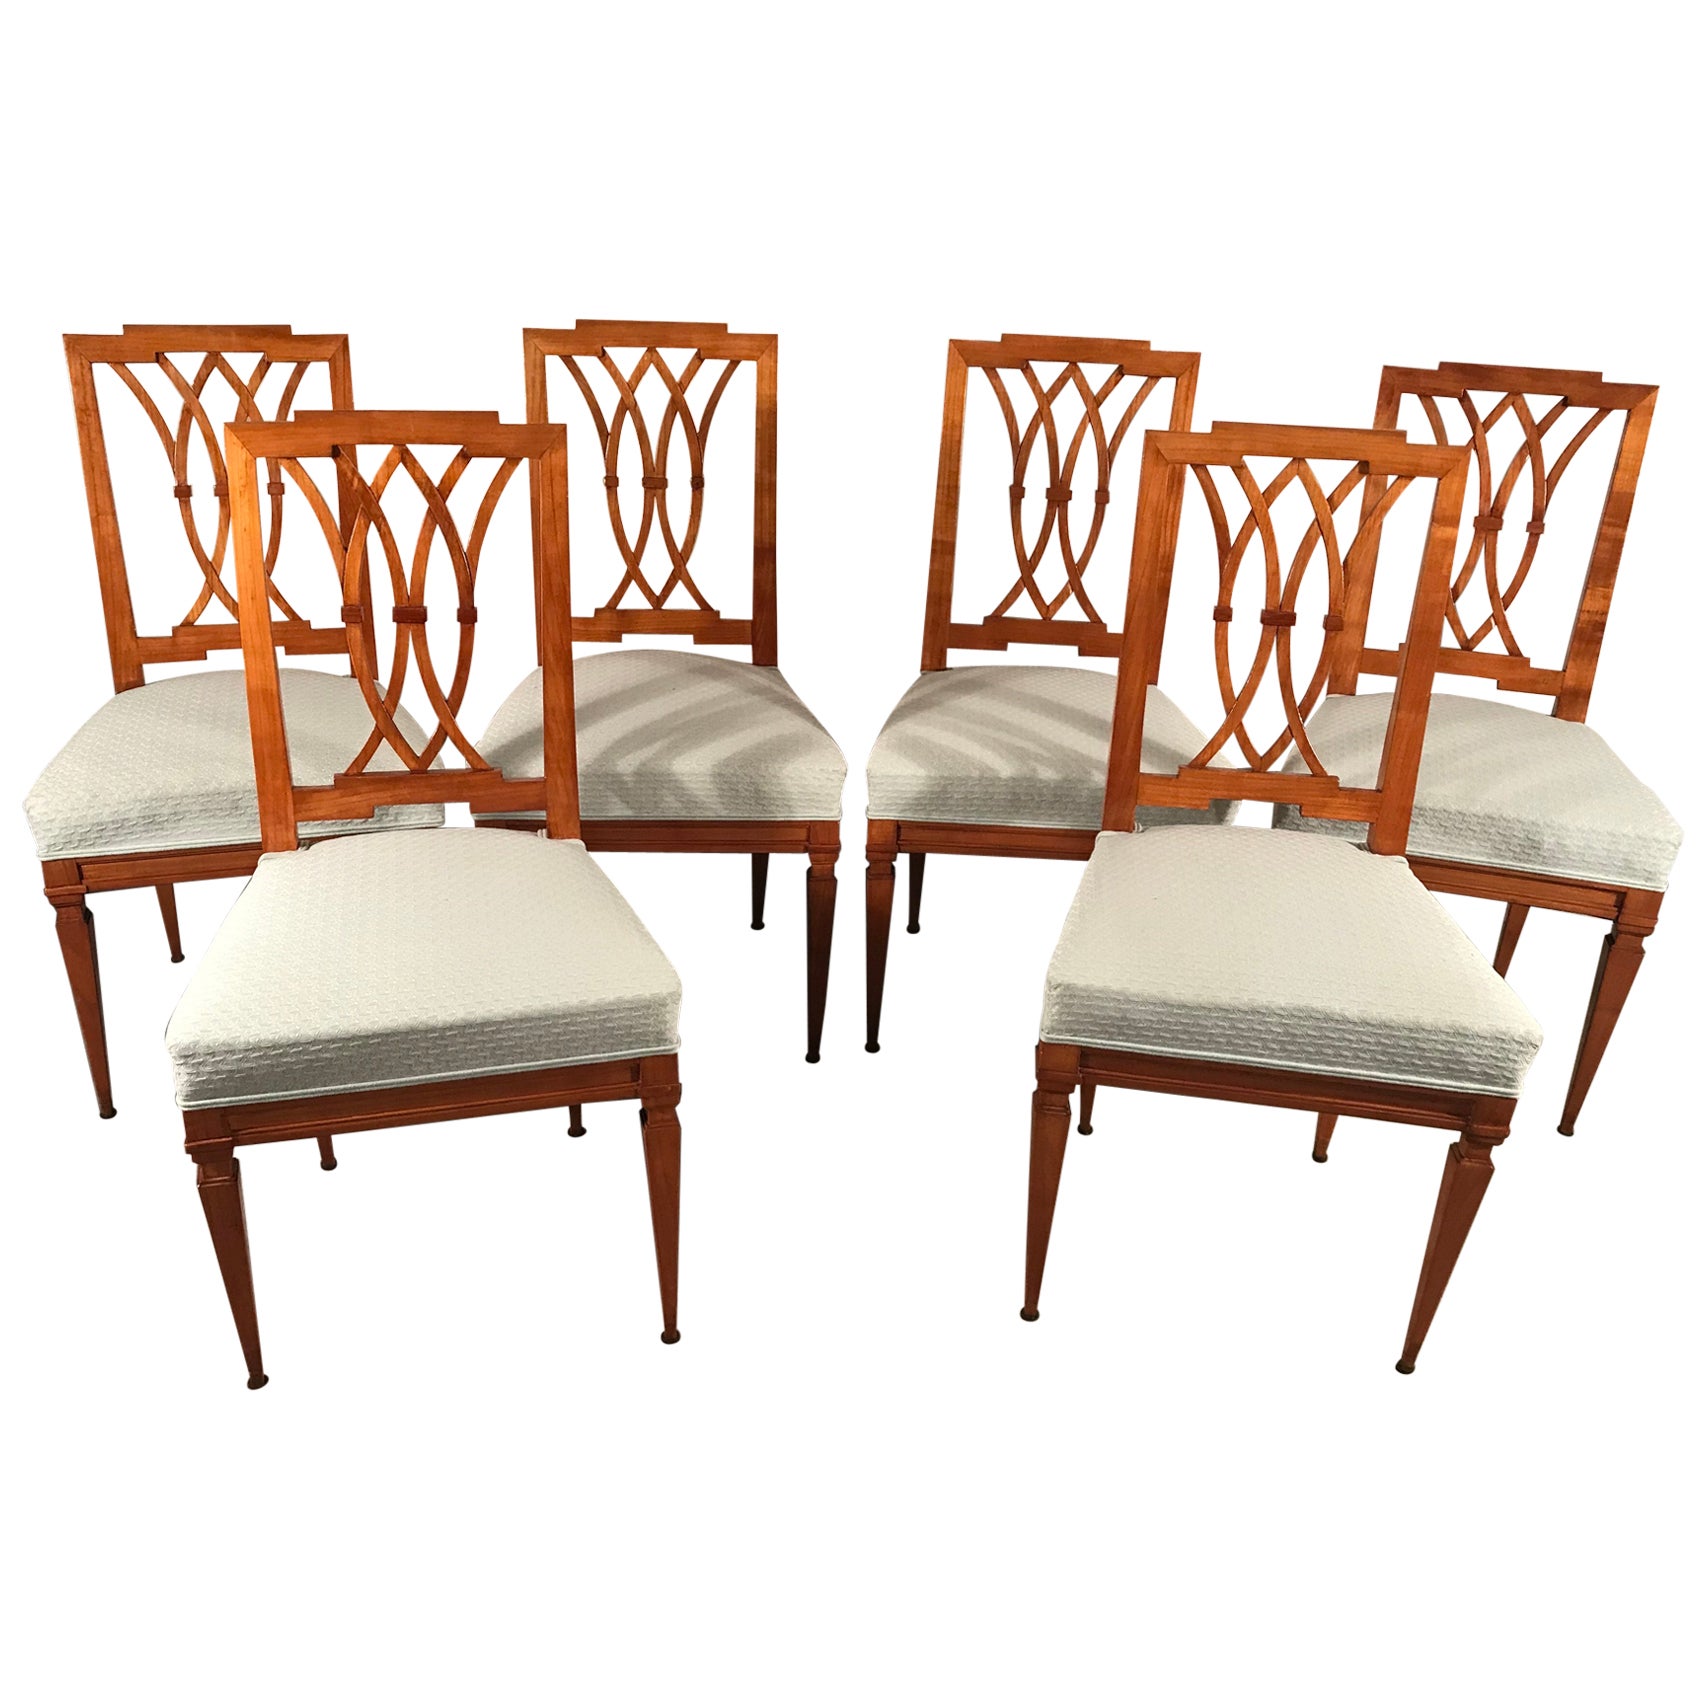 Set of Six Neoclassical Chairs, Germany around 1810